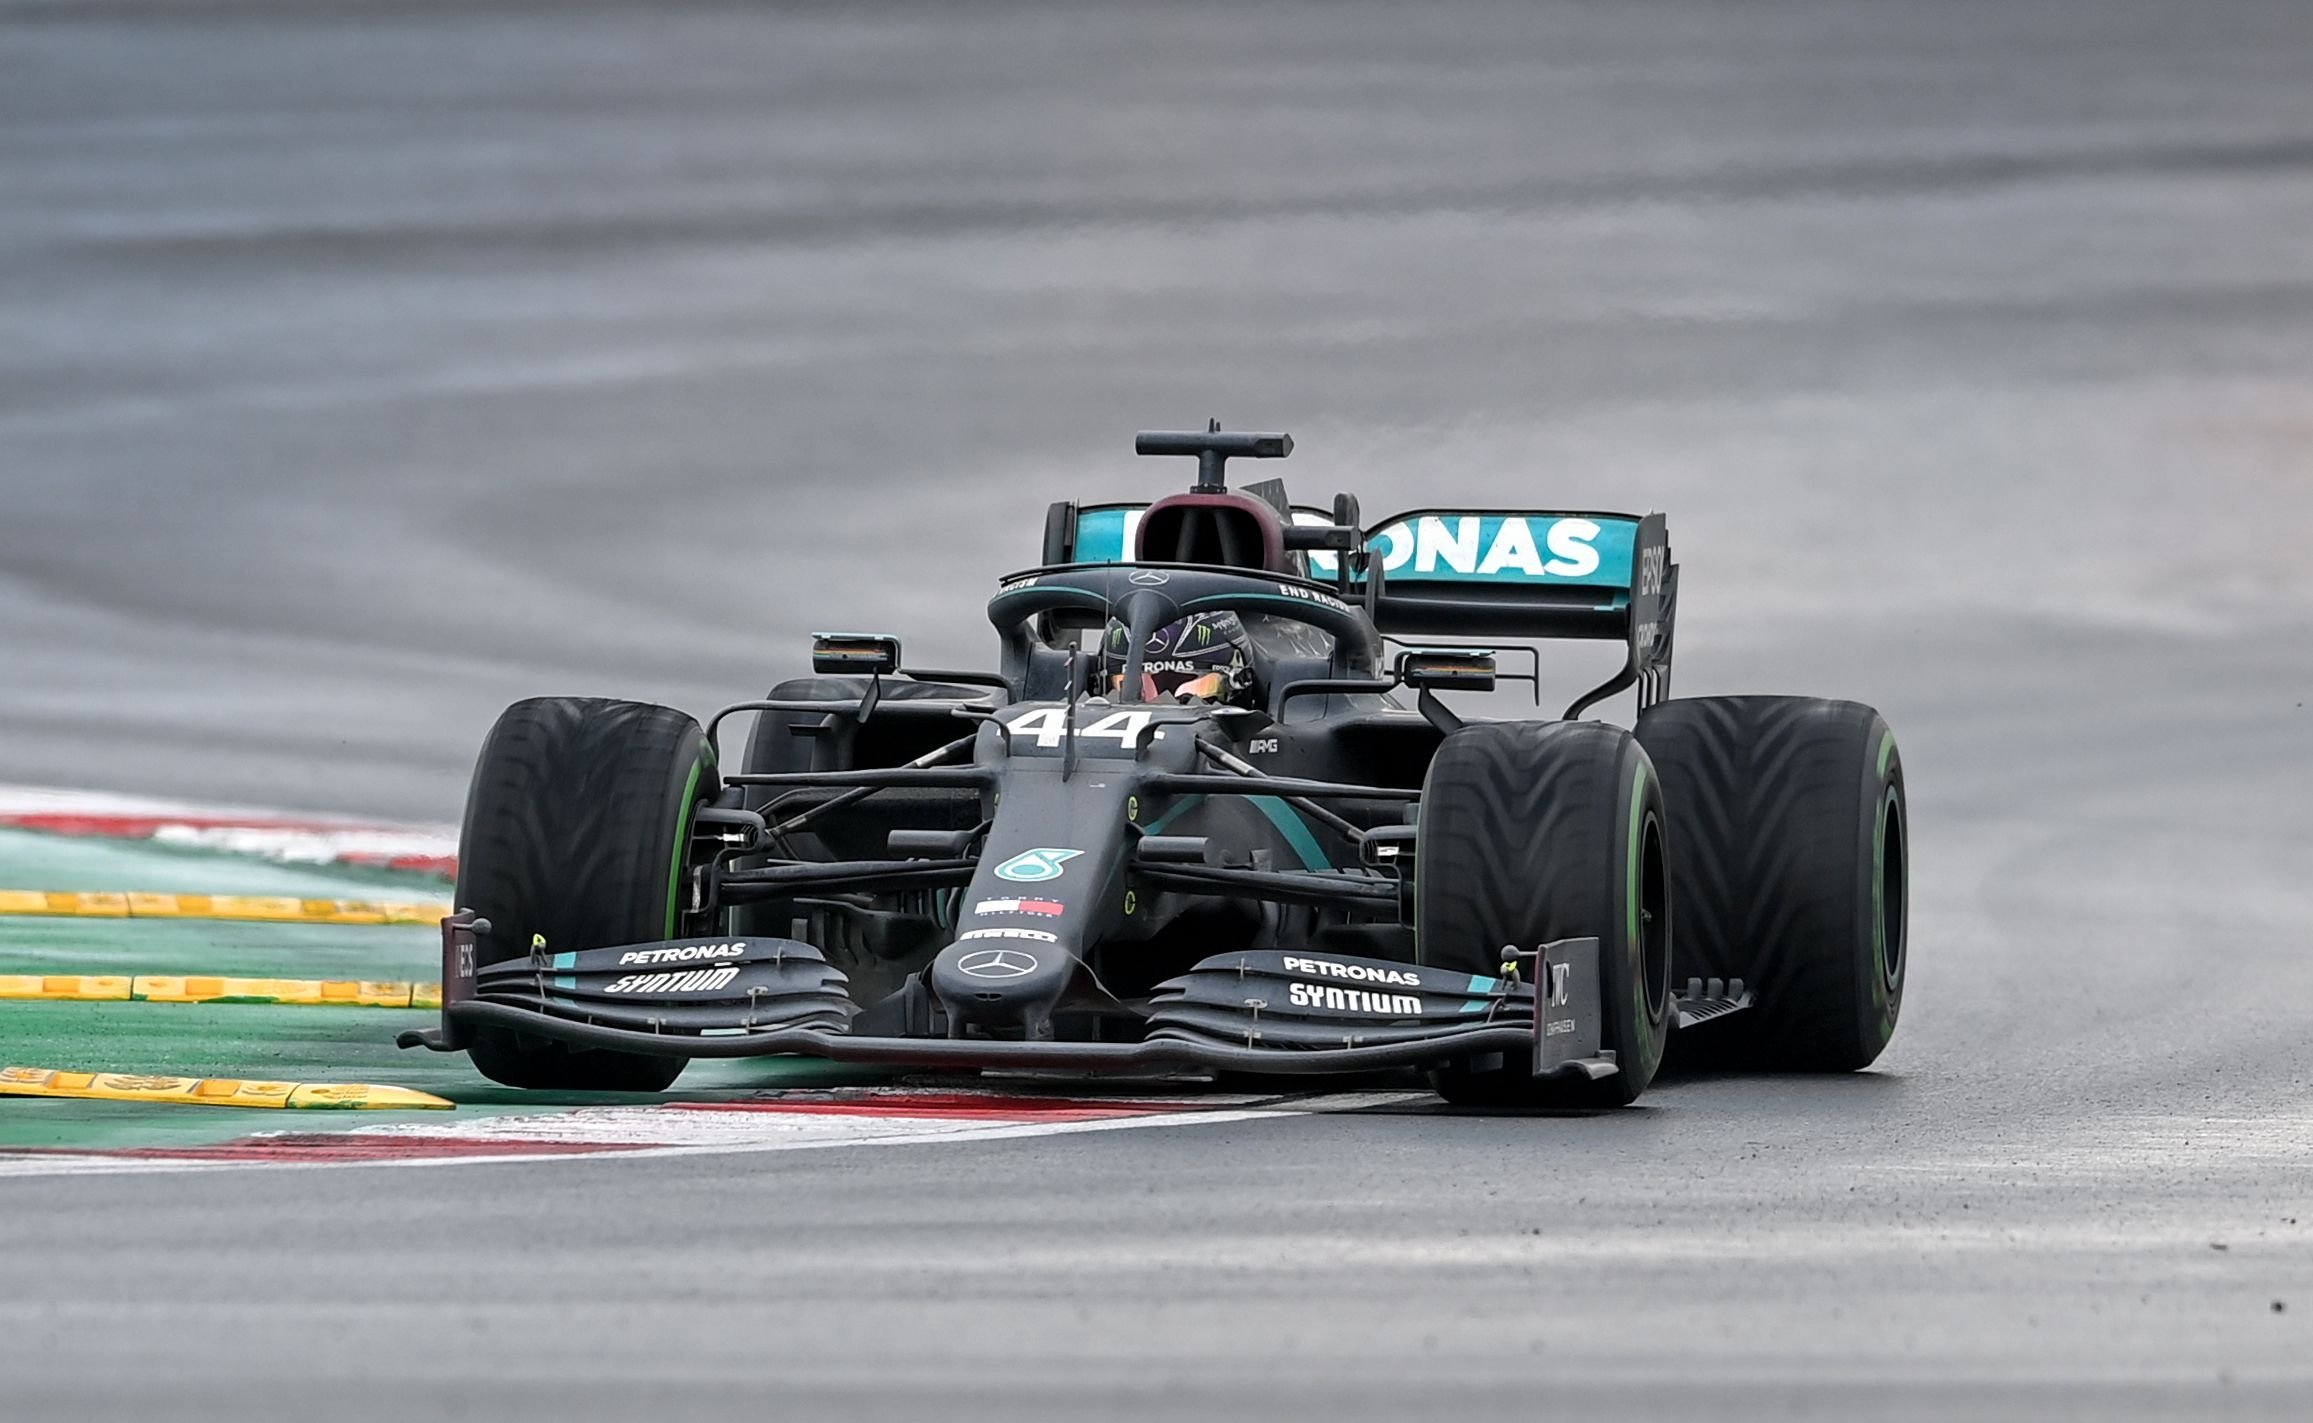 Mercedes' driver Lewis Hamilton drives during the Formula One Turkish Grand Prix in Istanbul, Turkey, Nov. 15, 2020. (AFP Photo)